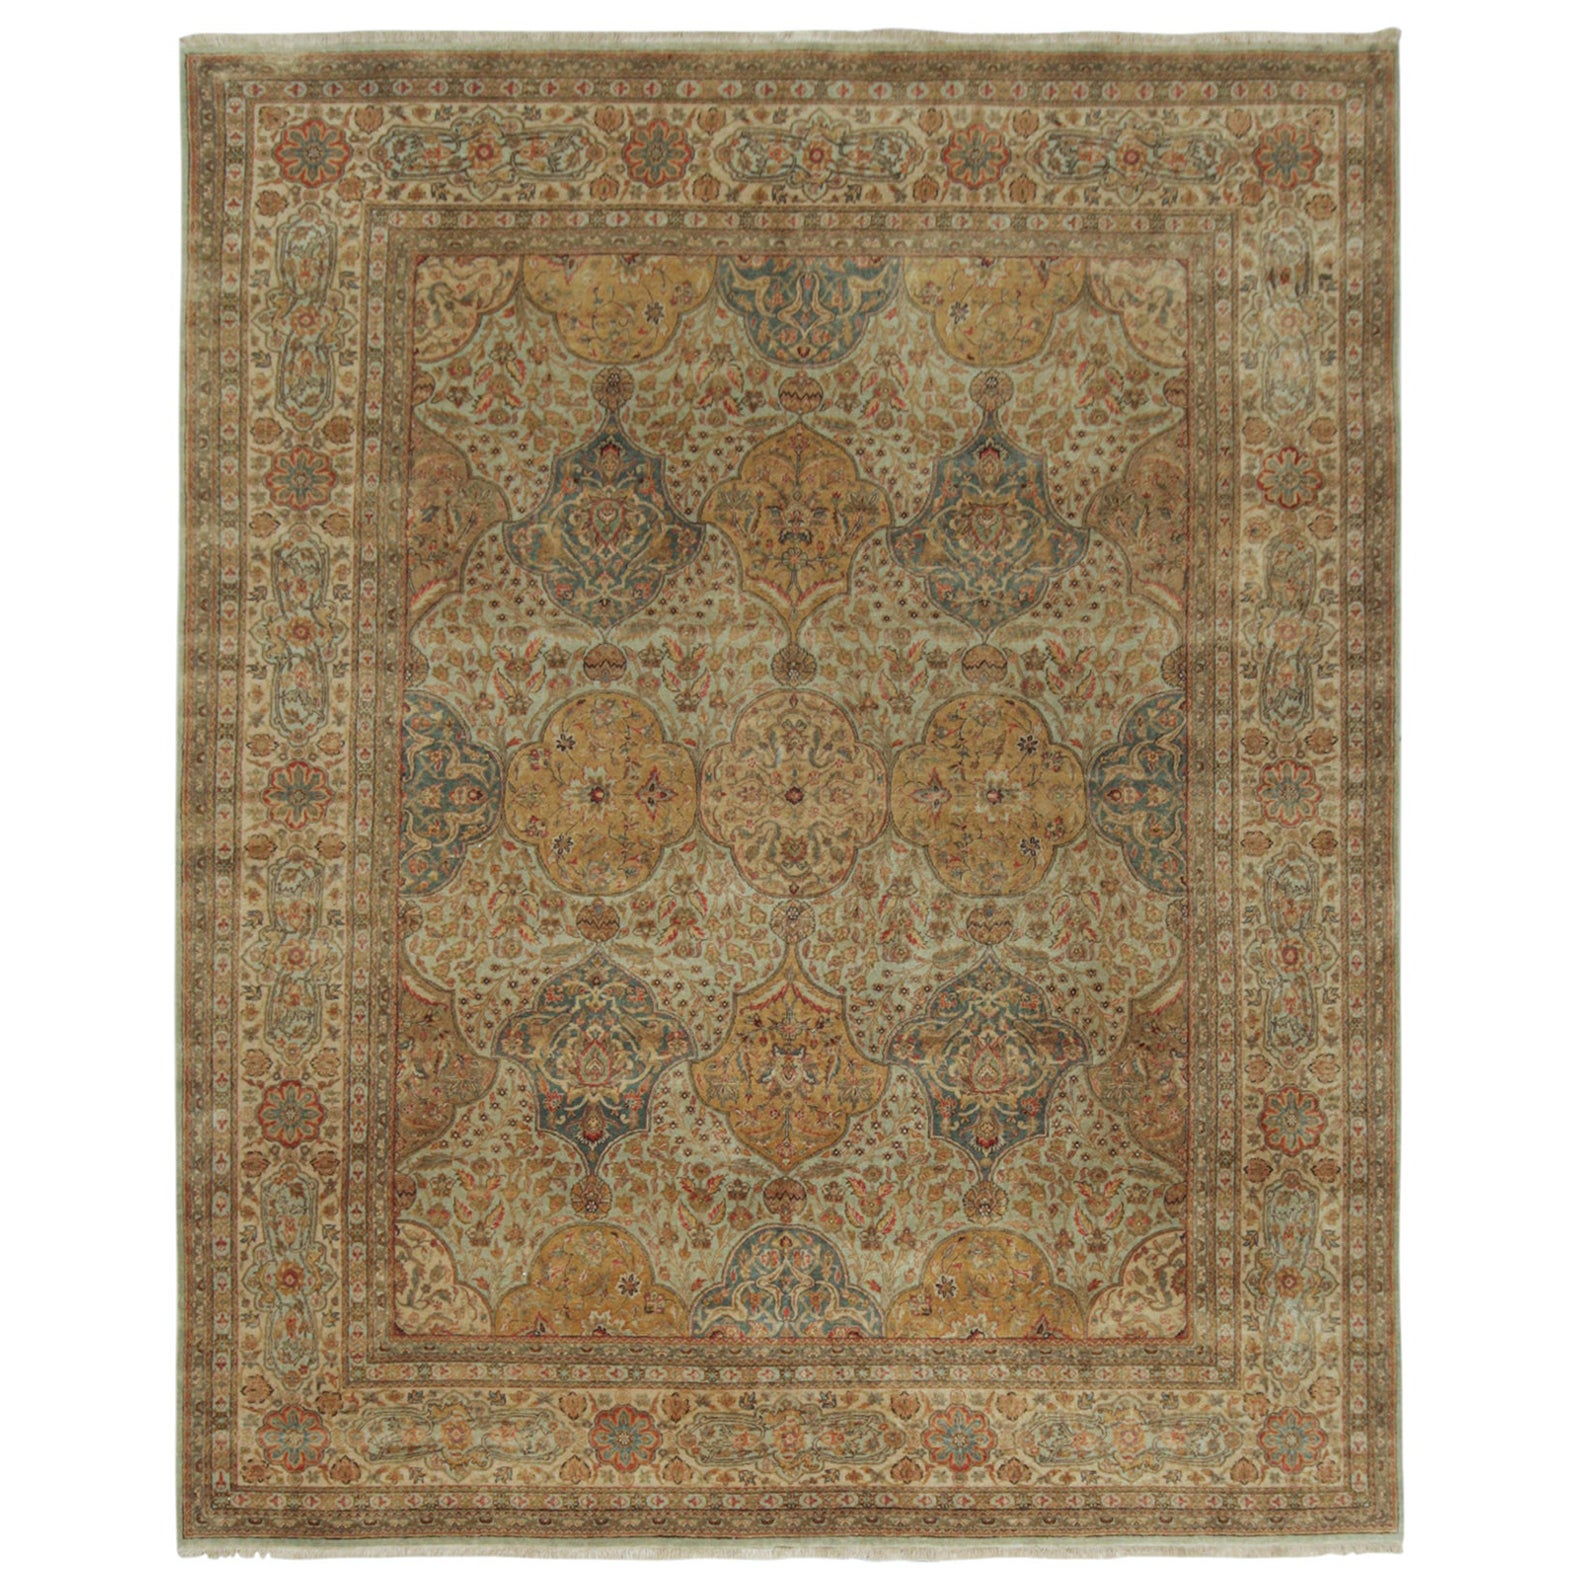 Rug & Kilim’s Classic style rug with Gold, Beige and Green Floral patterns